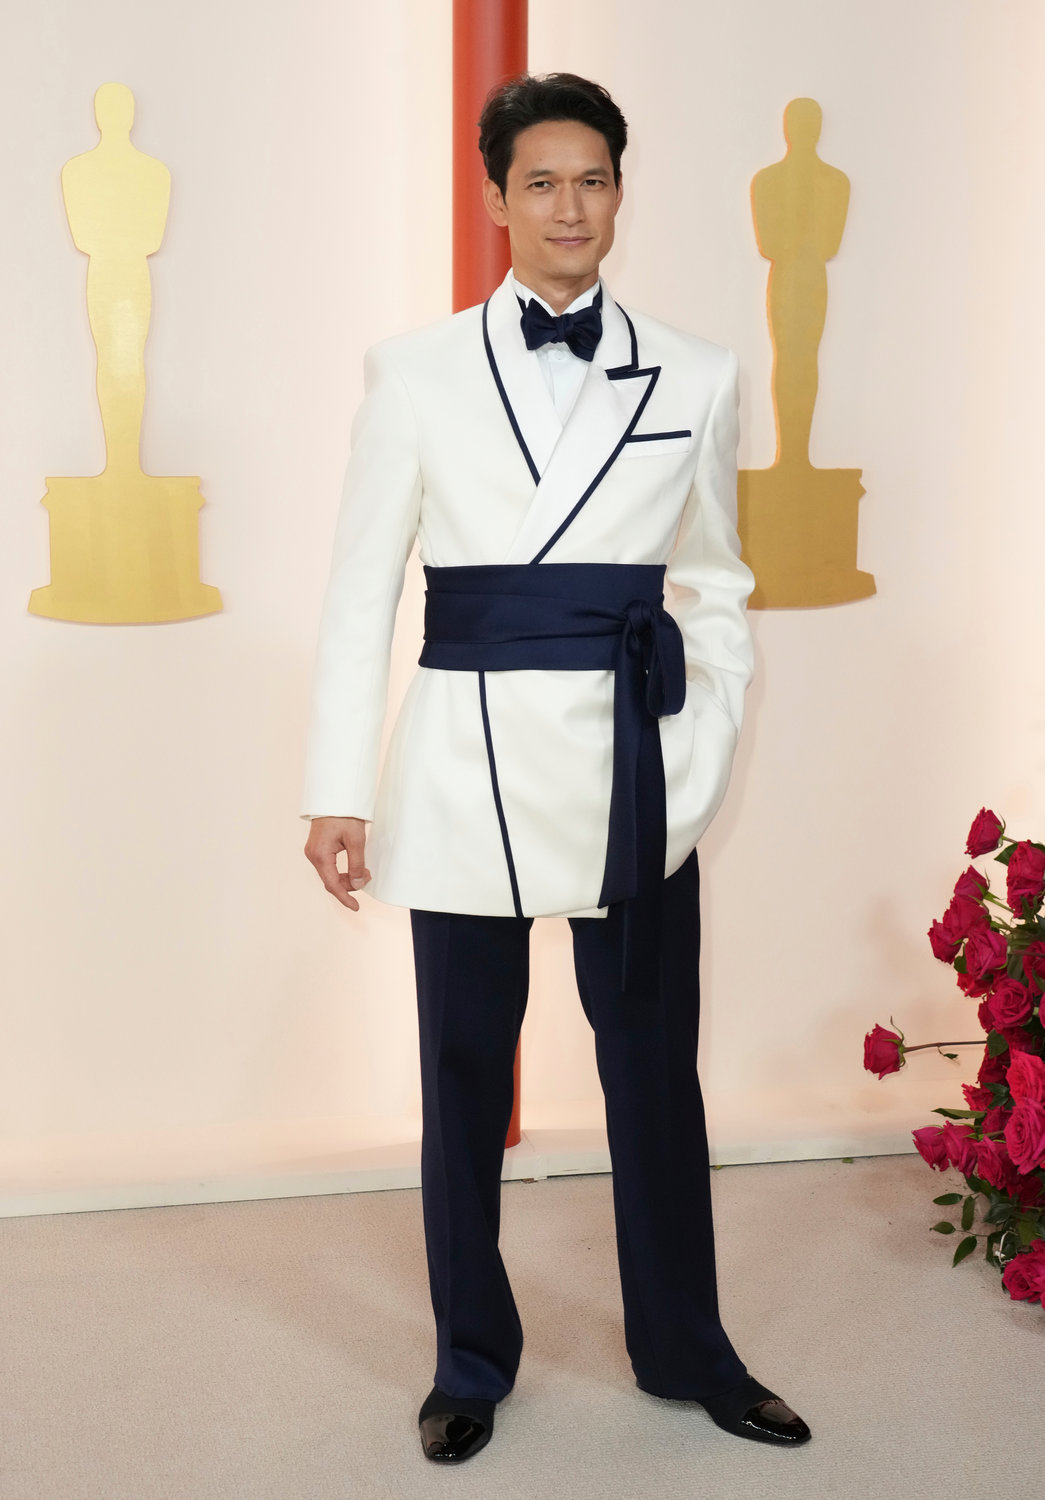 Harry Shum Jr. arrives at the Oscars on Sunday, March 12, 2023, at the Dolby Theatre in Los Angeles. (Photo by Jordan Strauss/Invision/AP)